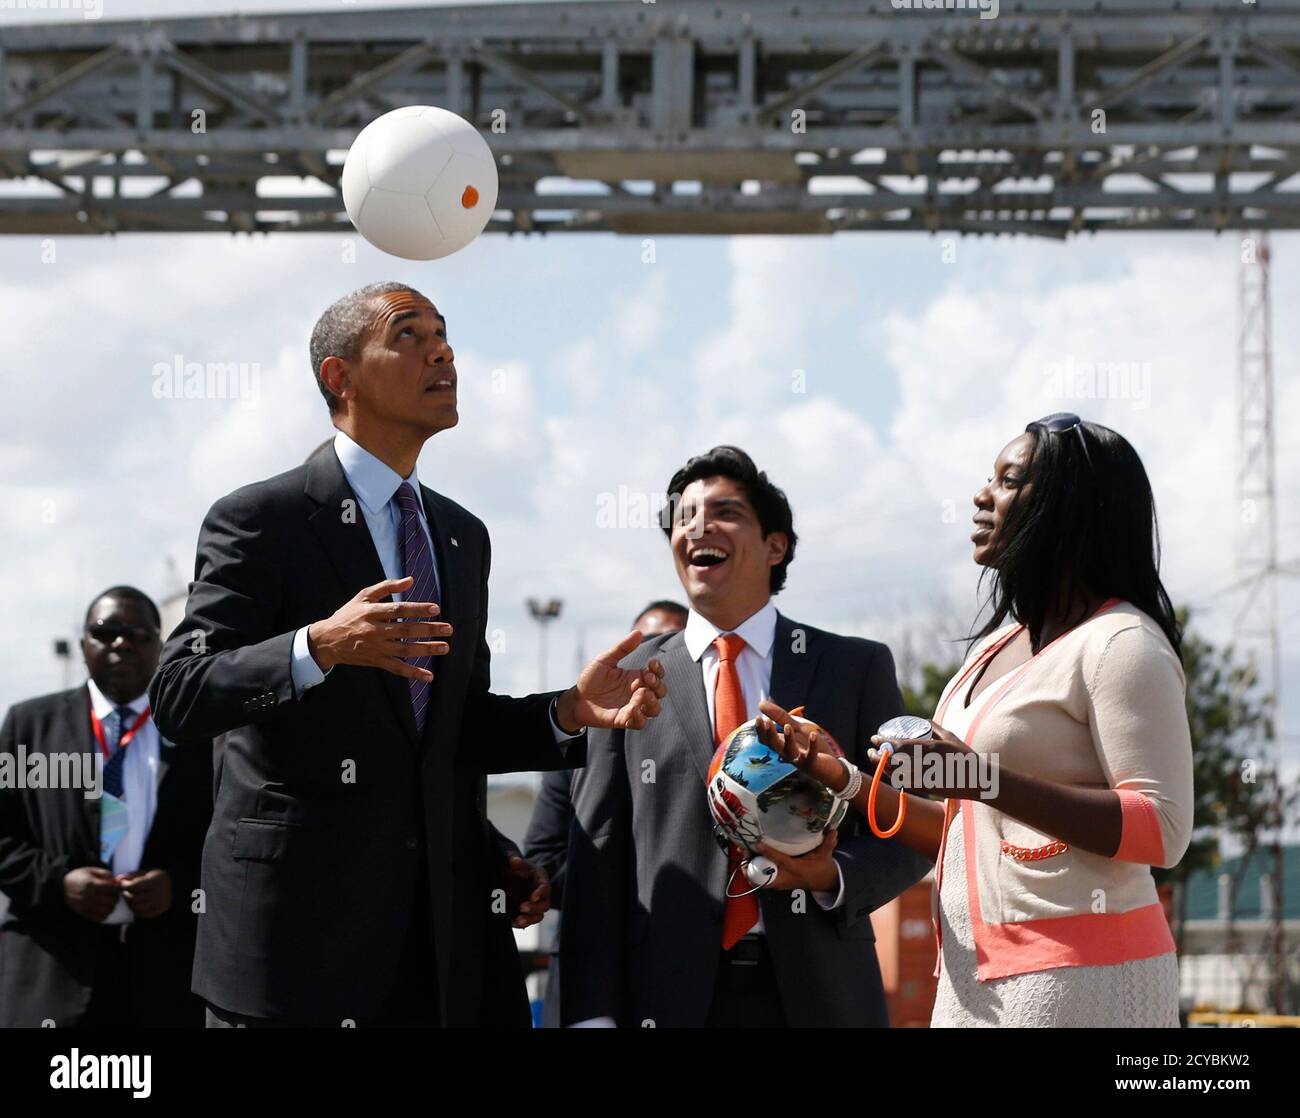 U.S. President Barack Obama heads a soccer ball at Ubungo Power Plant in  Dar es Salaam July 2, 2013. The ball called a "soccket ball" has internal  electronics that allows it to